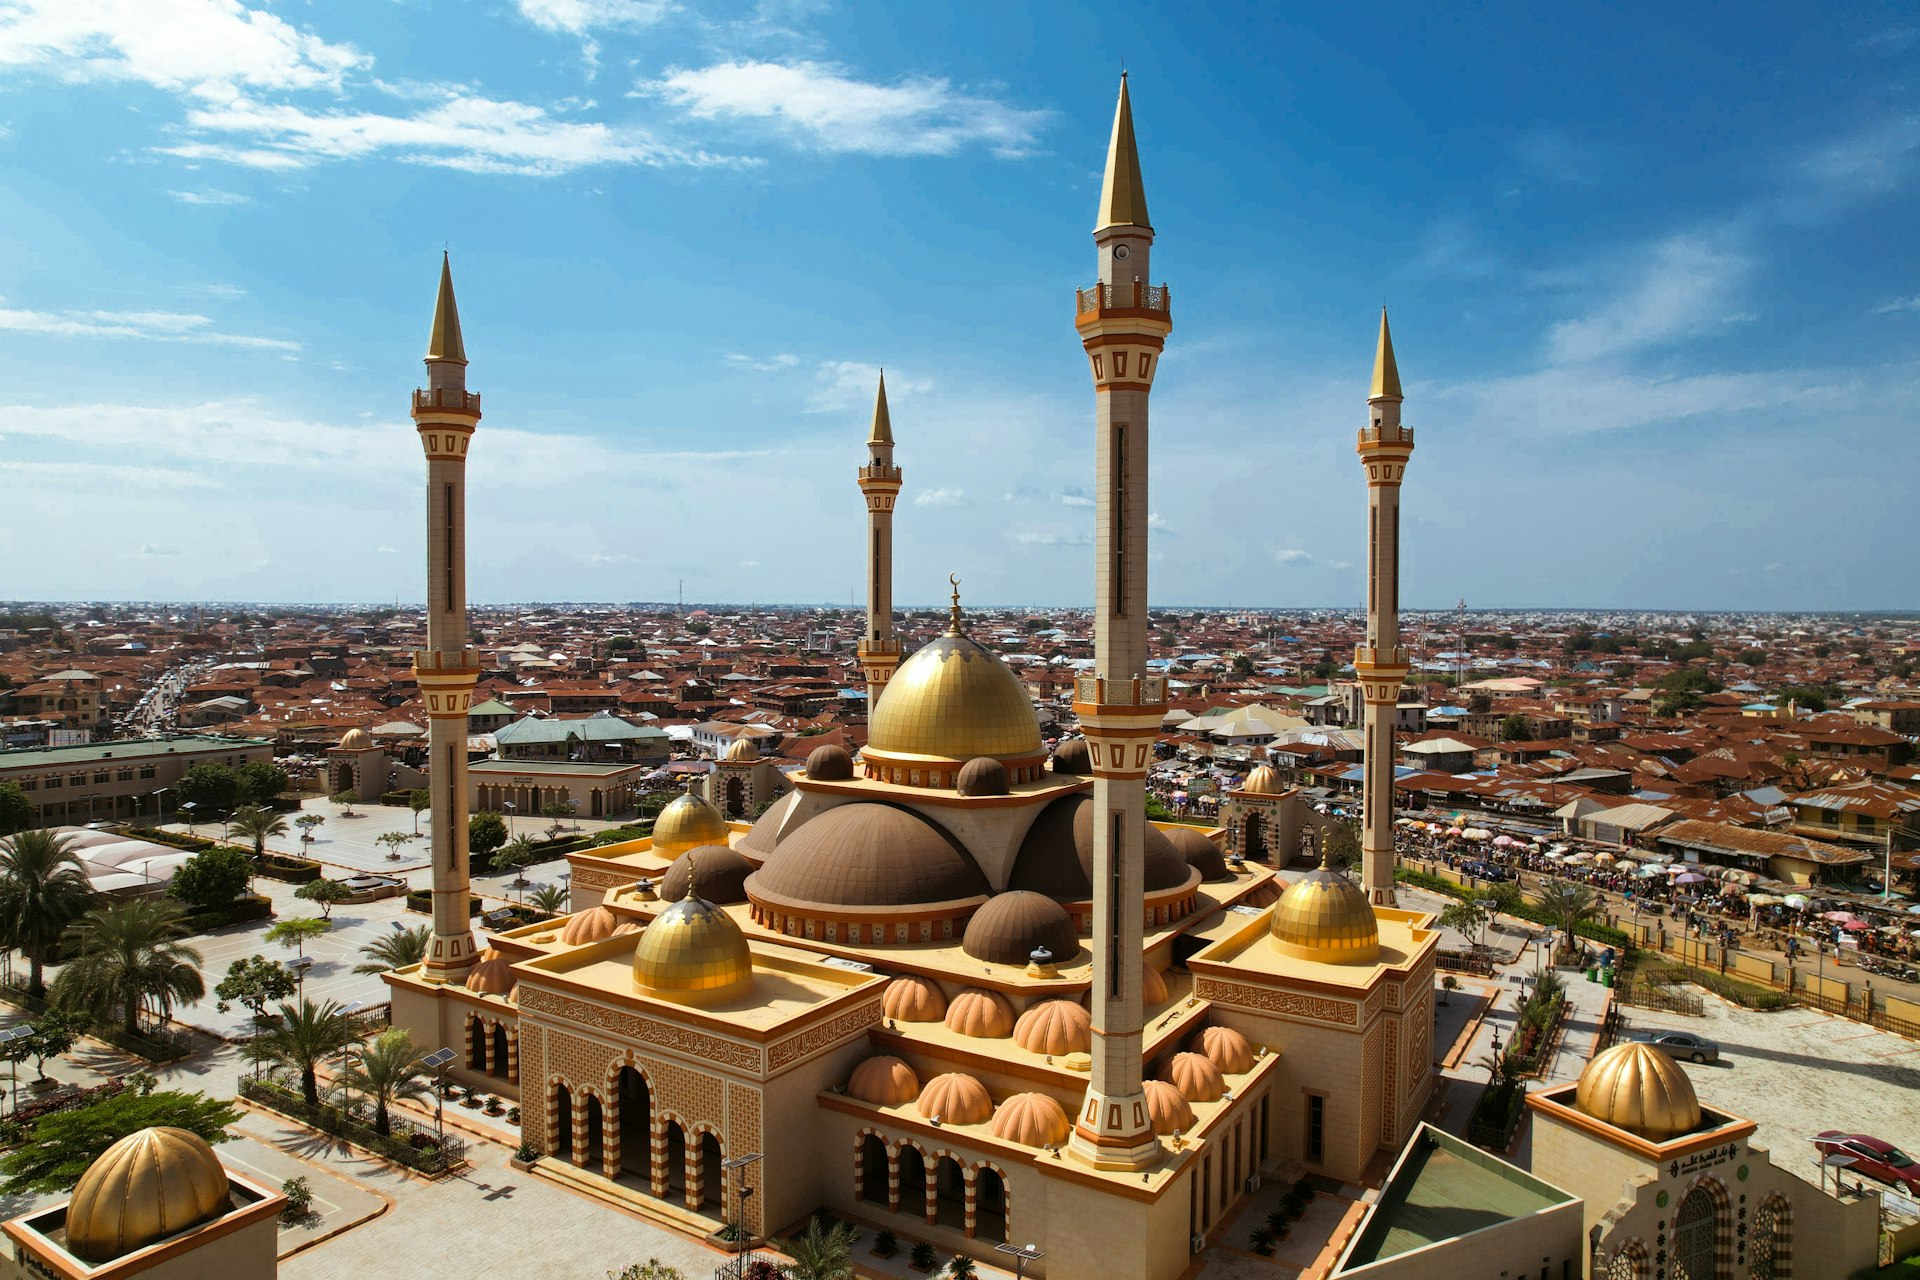 A vast beautiful gold-and-brown mosque with many central domes and four tall minarets